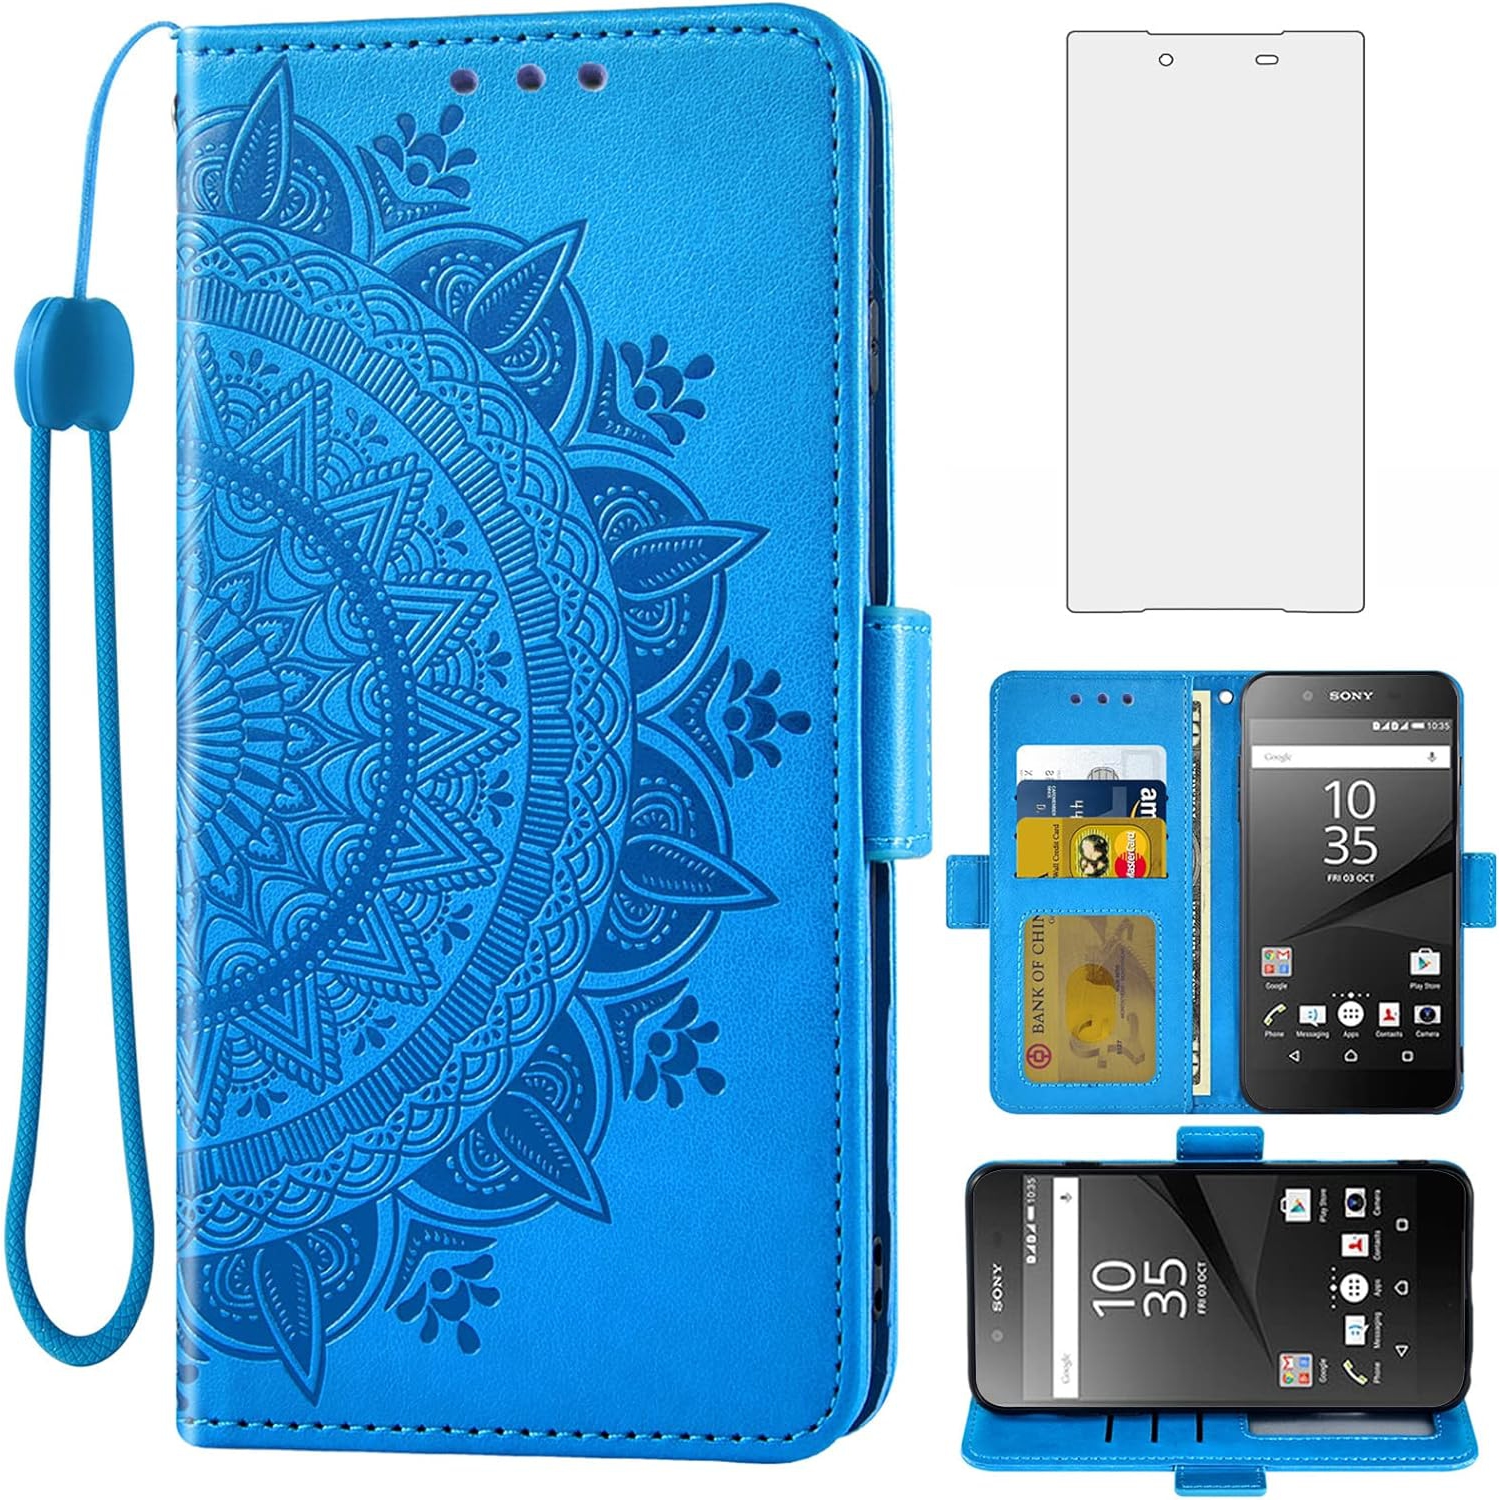 Compatible with Sony Xperia Z5 Wallet Case and Tempered Glass Screen Protector Credit Card Holder Flip Purse